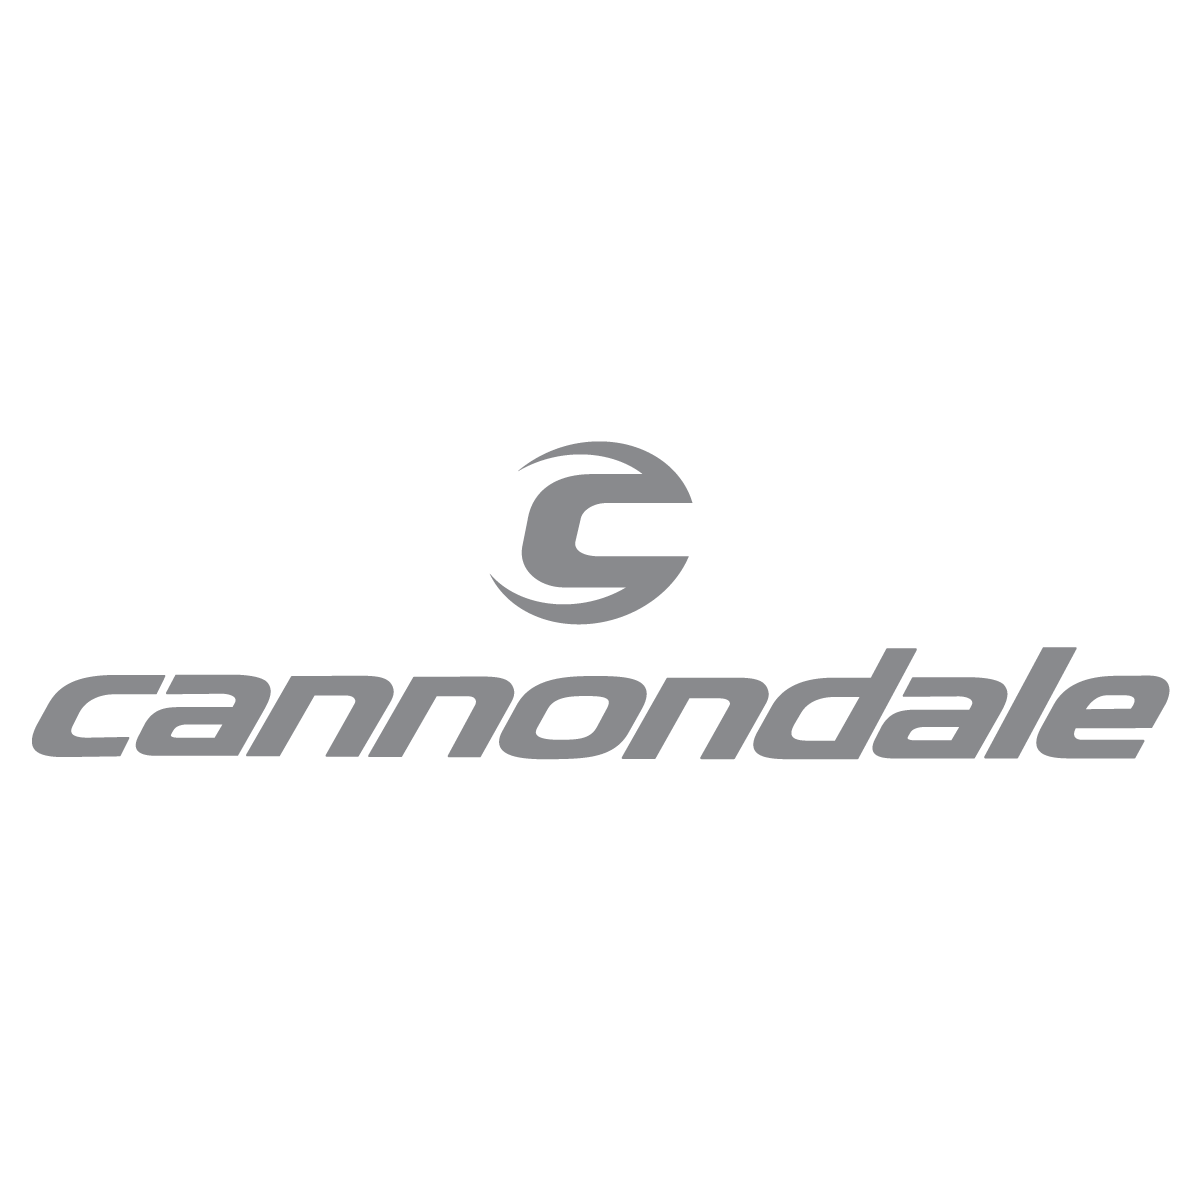 Cannondale Bicycles Logo